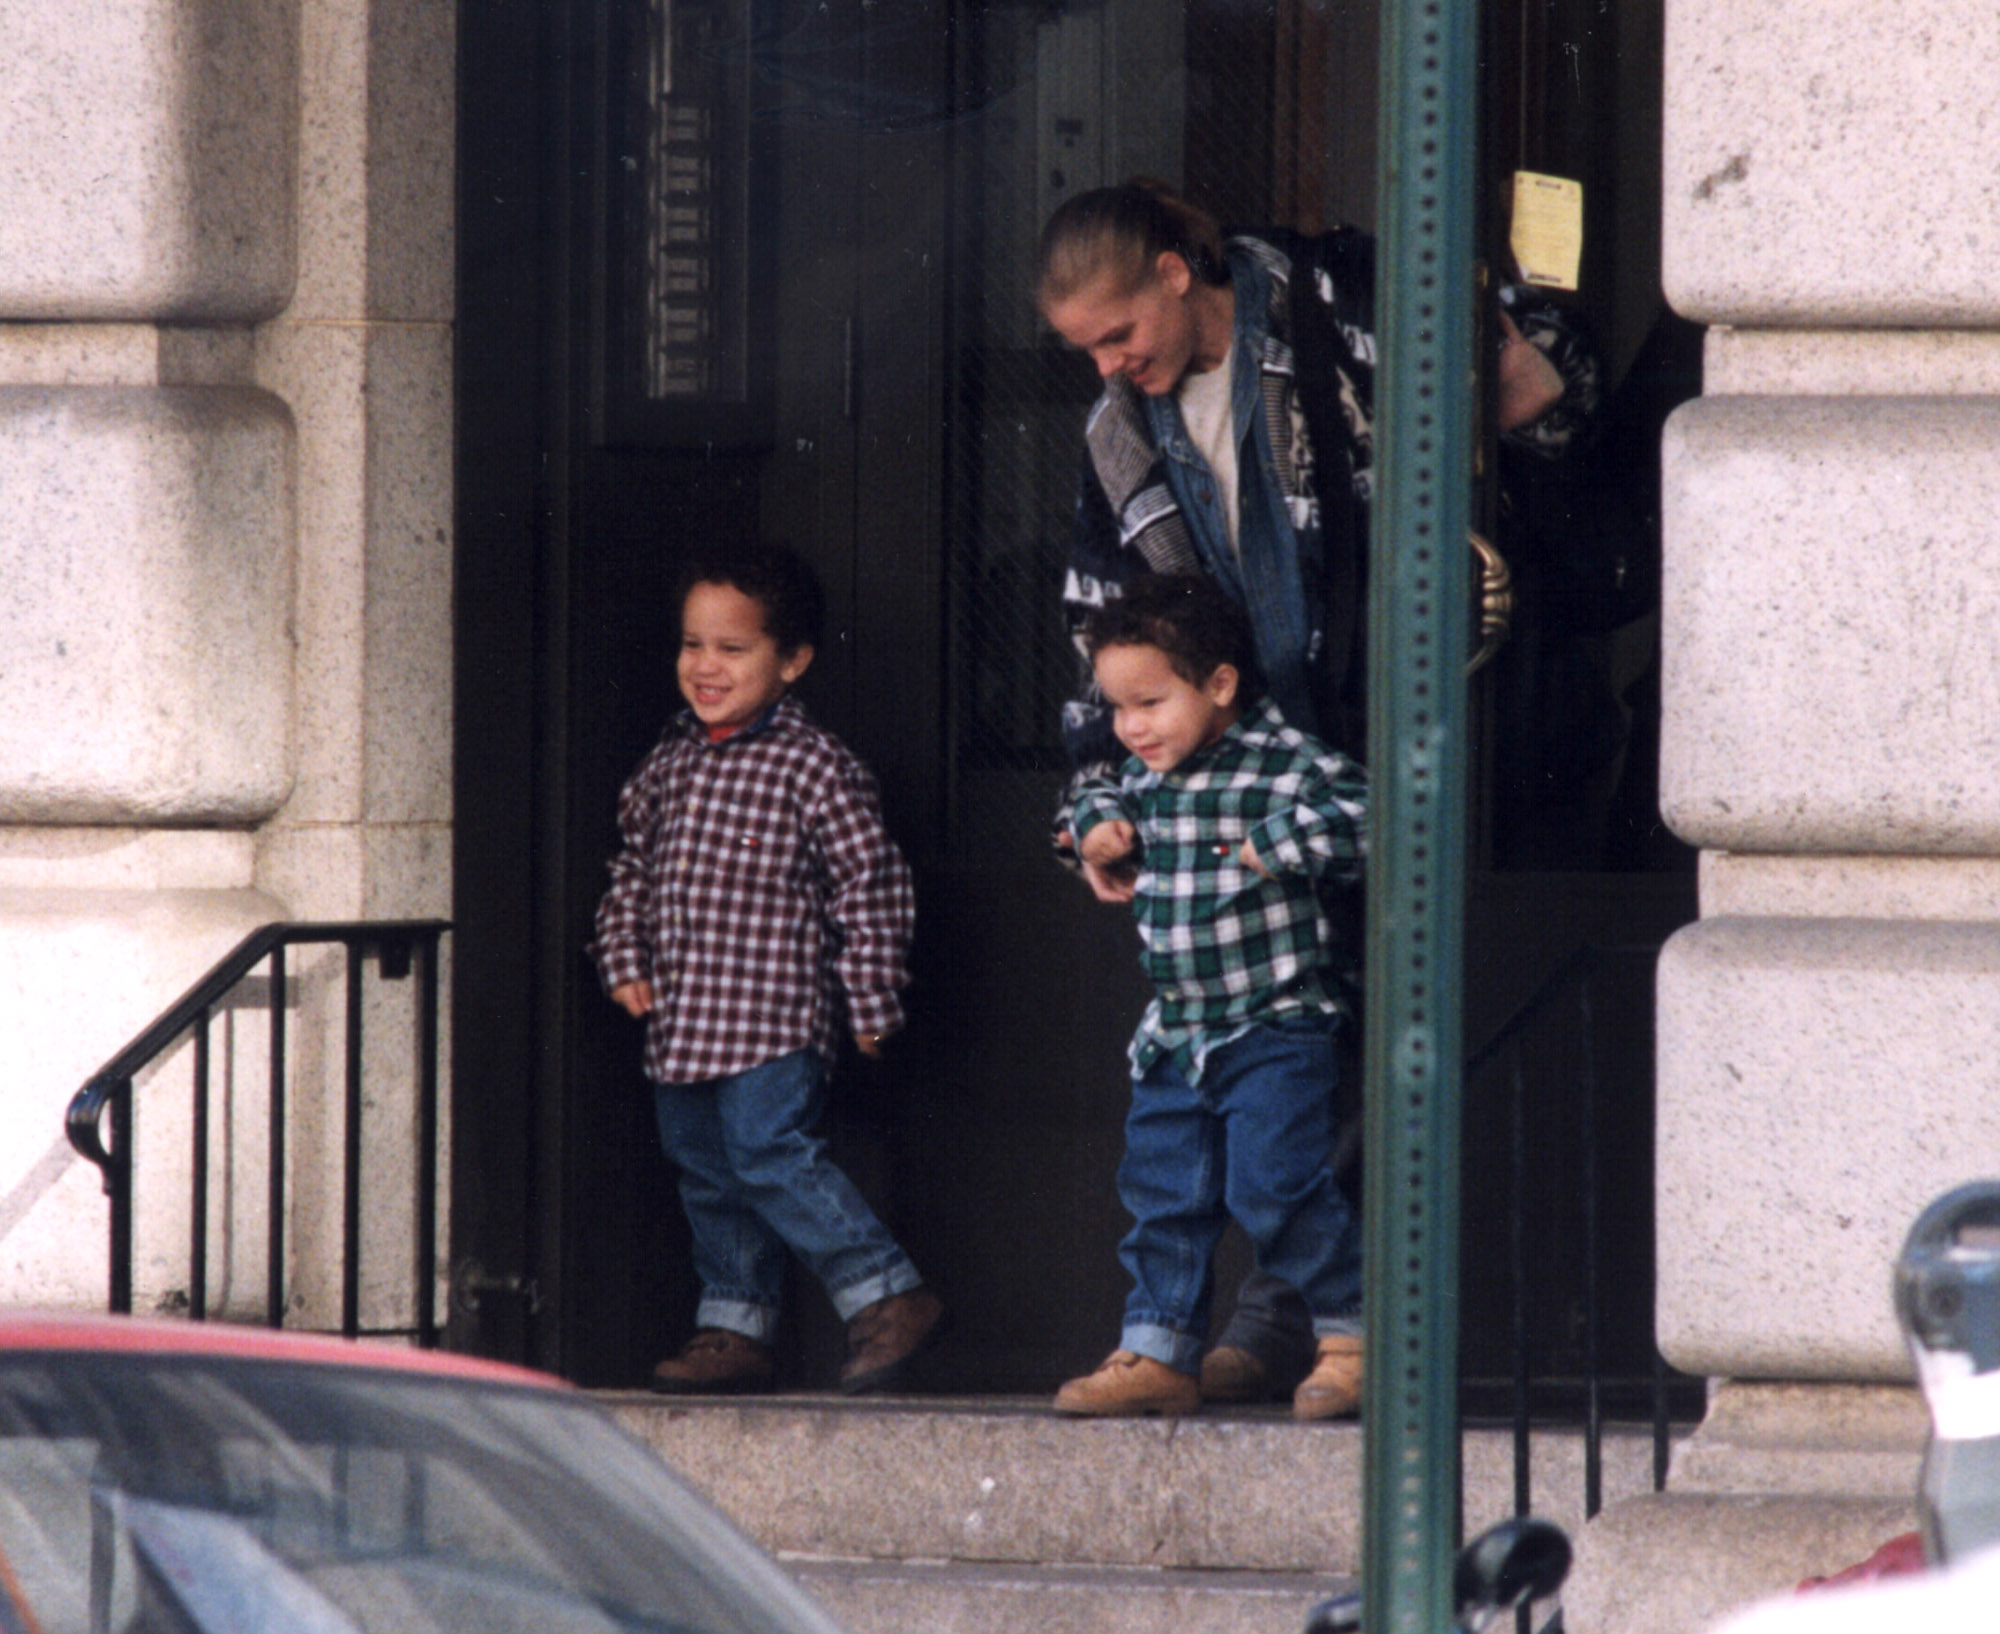 Toukie Smith and her twin boys Aaron and Julian De Niro, in New York, on November 6, 1998 | Source: Getty Images